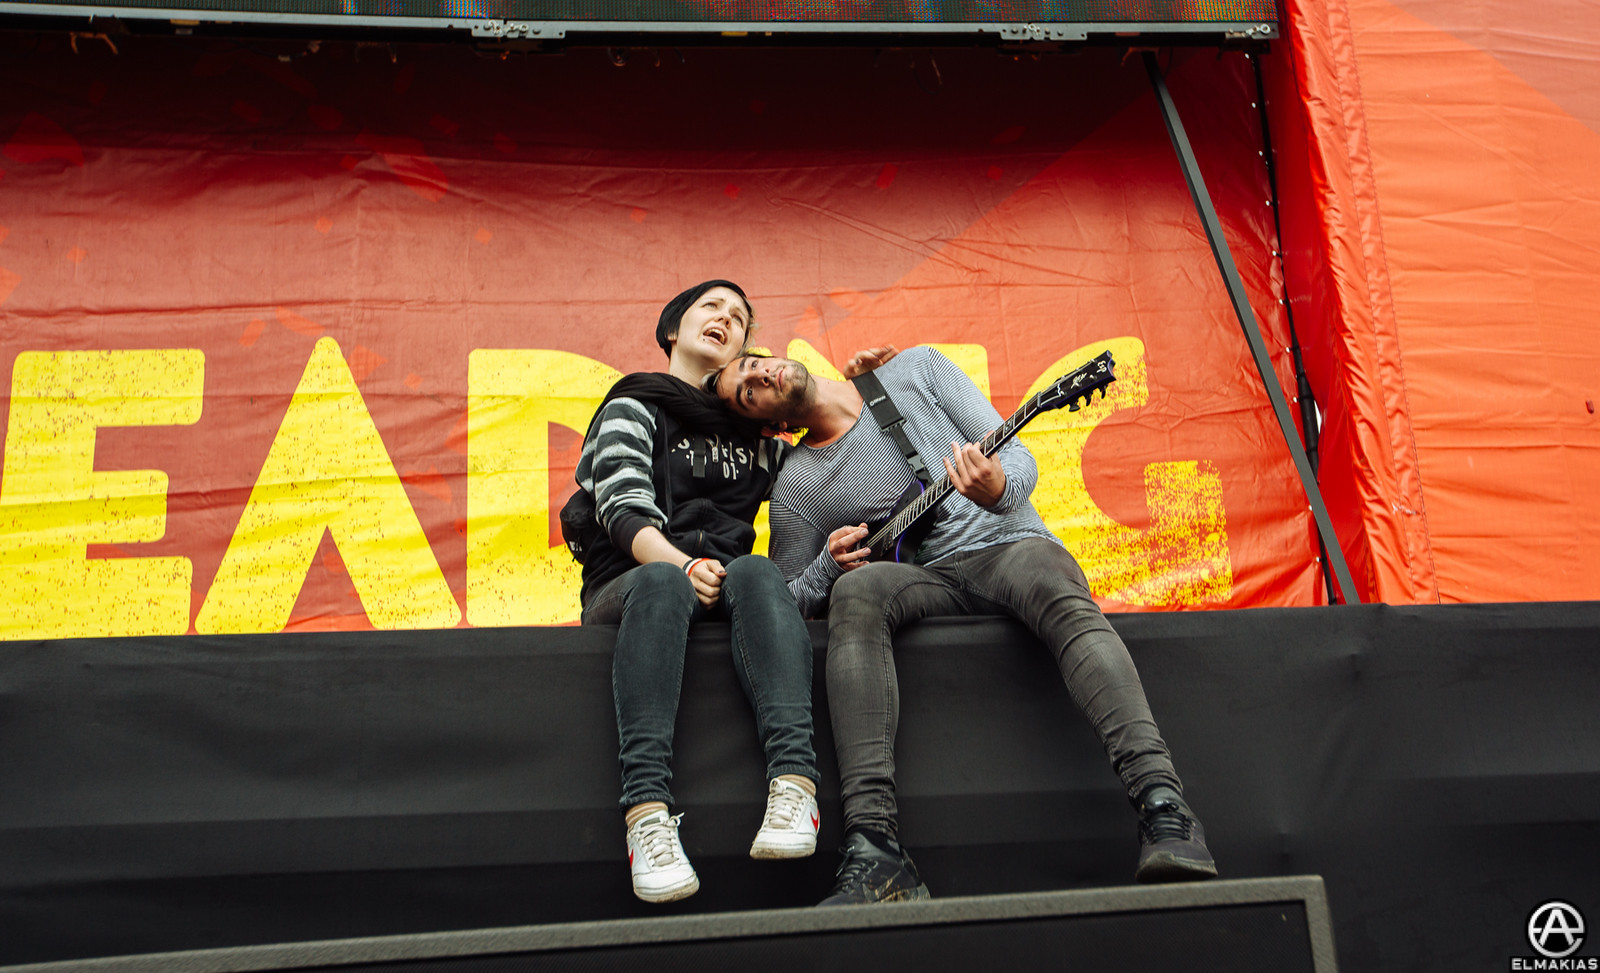 Jack Barakat and fan hanging on stage at Reading Festival 2015 by Adam Elmakias